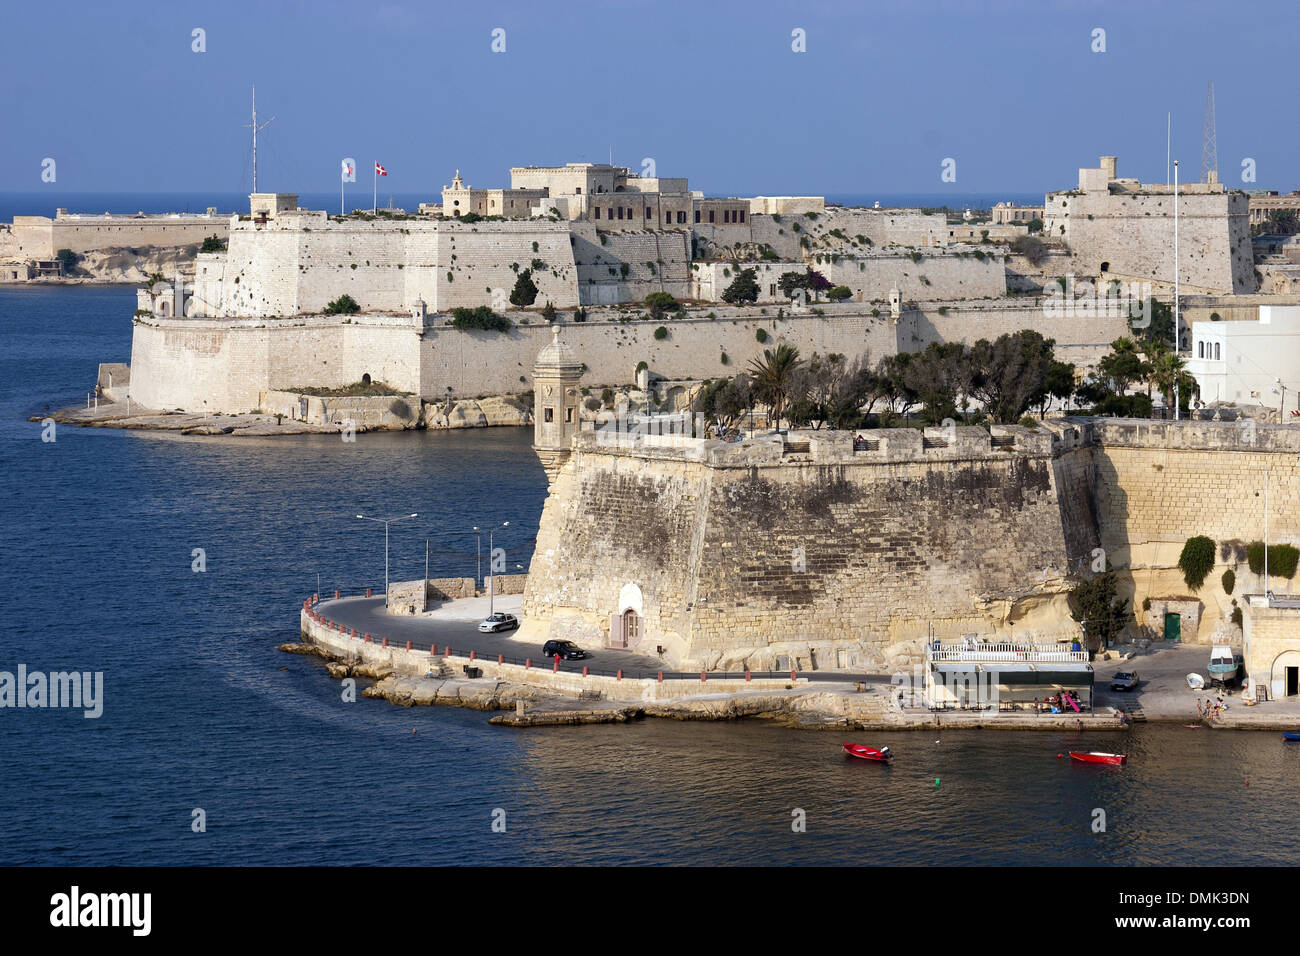 REMPARTS OF THE SAINT-MICHAEL FORT IN SENGLEA IN THE FOREGROUND WITH, IN THE BACKGROUND, THE SAINT ANGELO FORT IN VITTORIOSA (OR BIRGU) AND THE FORT RICASOLI FORT IN KALKARA, THE 3 CITIES, THE BIG PORT OF LA VALETTE, LA VALETTE, MALTA Stock Photo